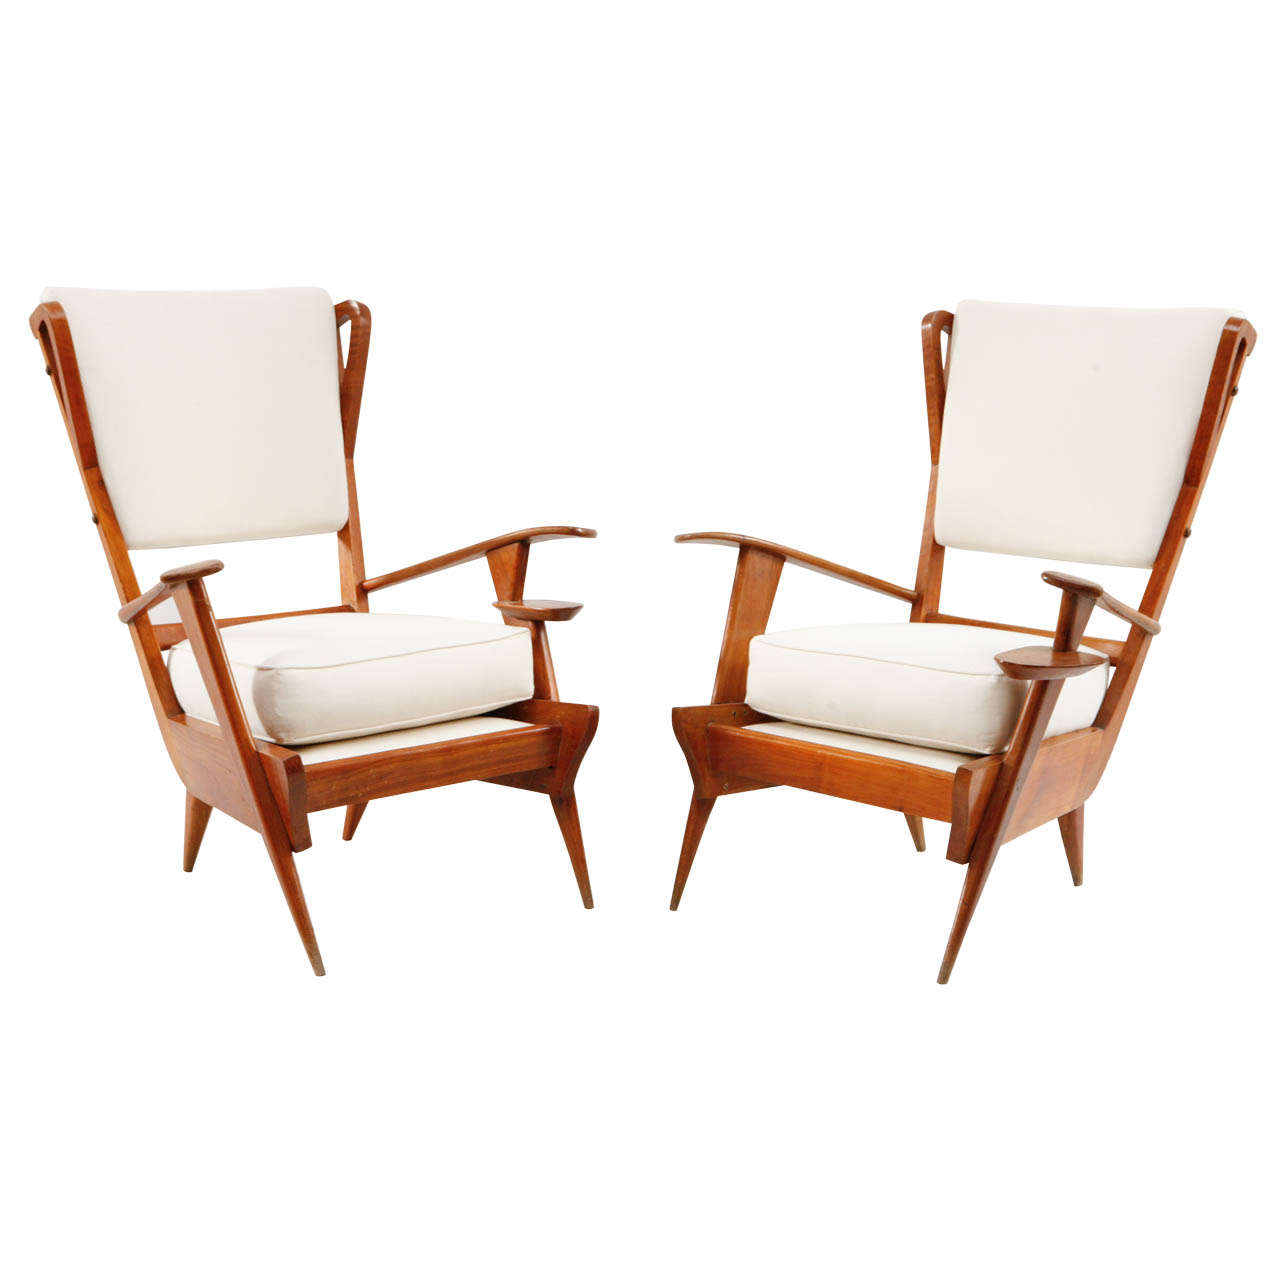 Pair of Italian Teak Viewing Chairs with Cup Holder